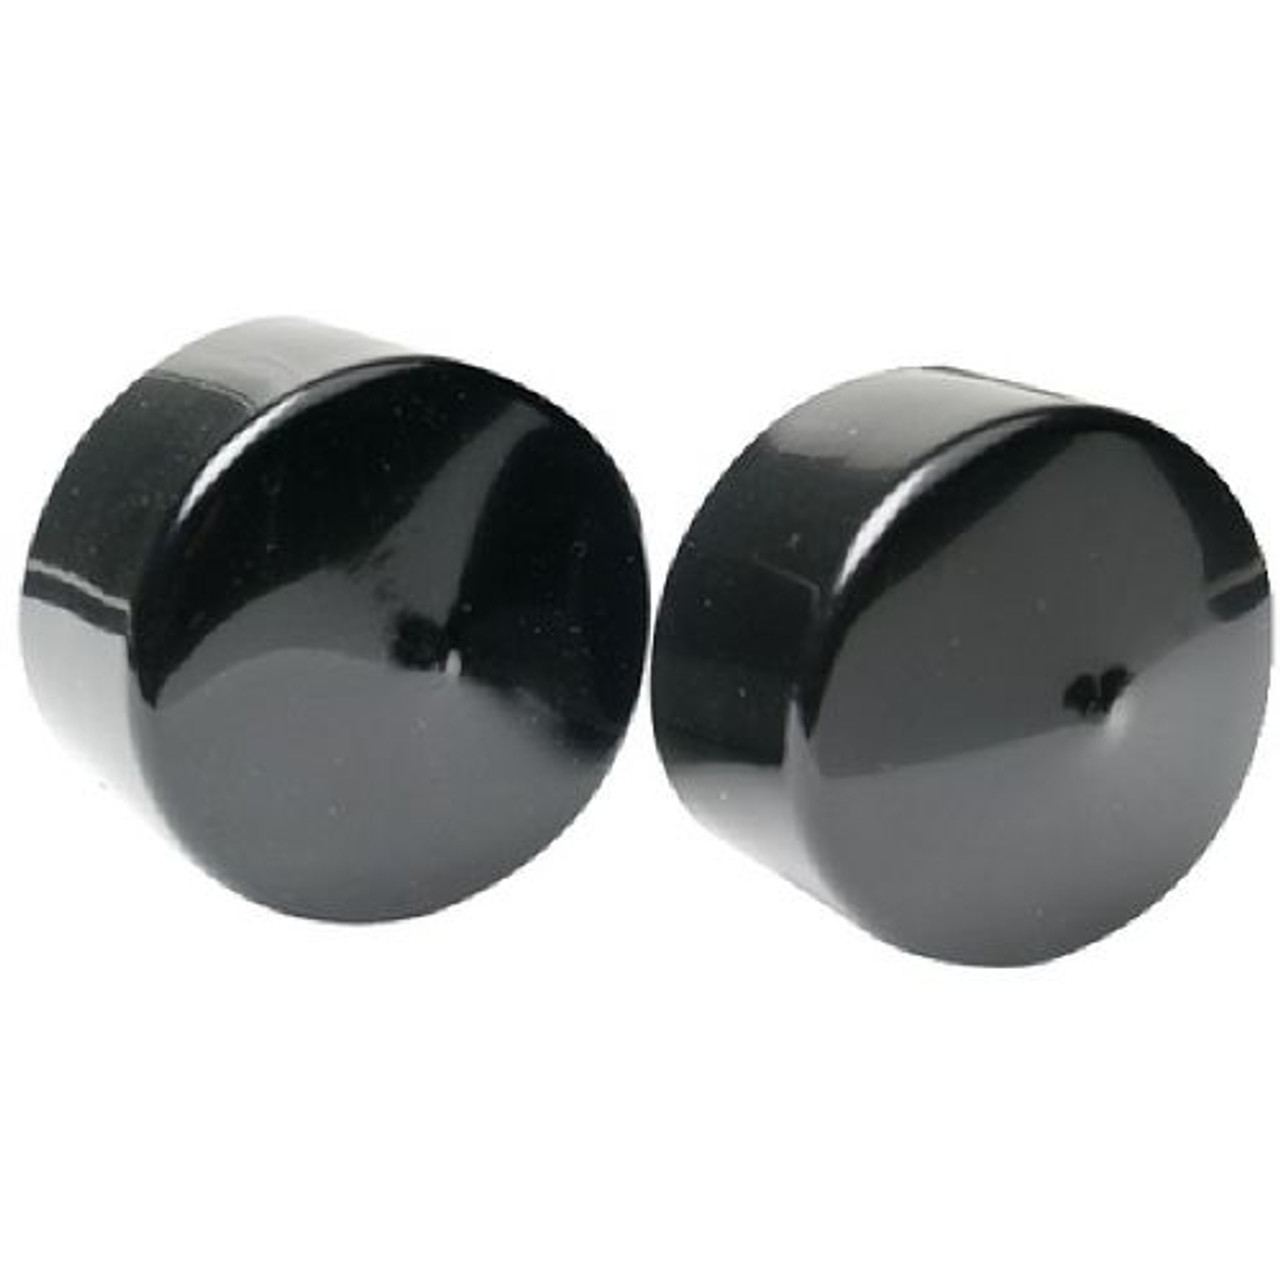 Pack of 2 Black Plastic Boat Trailer Bearing Protector Covers